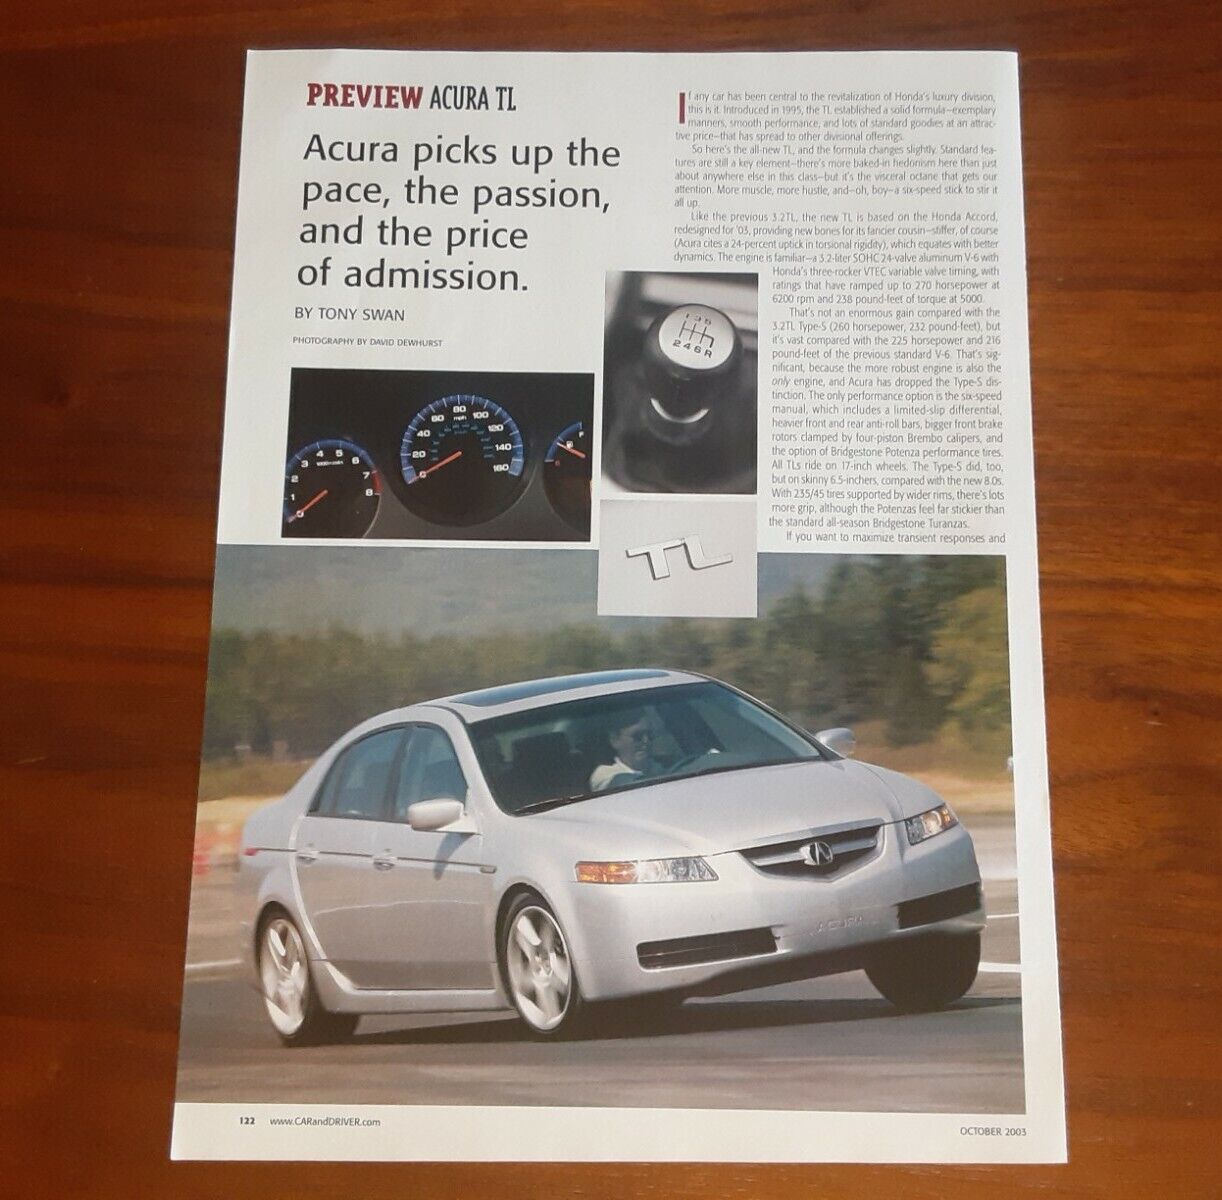 Acura Tl Magazine Article Car And Driver Picks Up The Pace And Passion